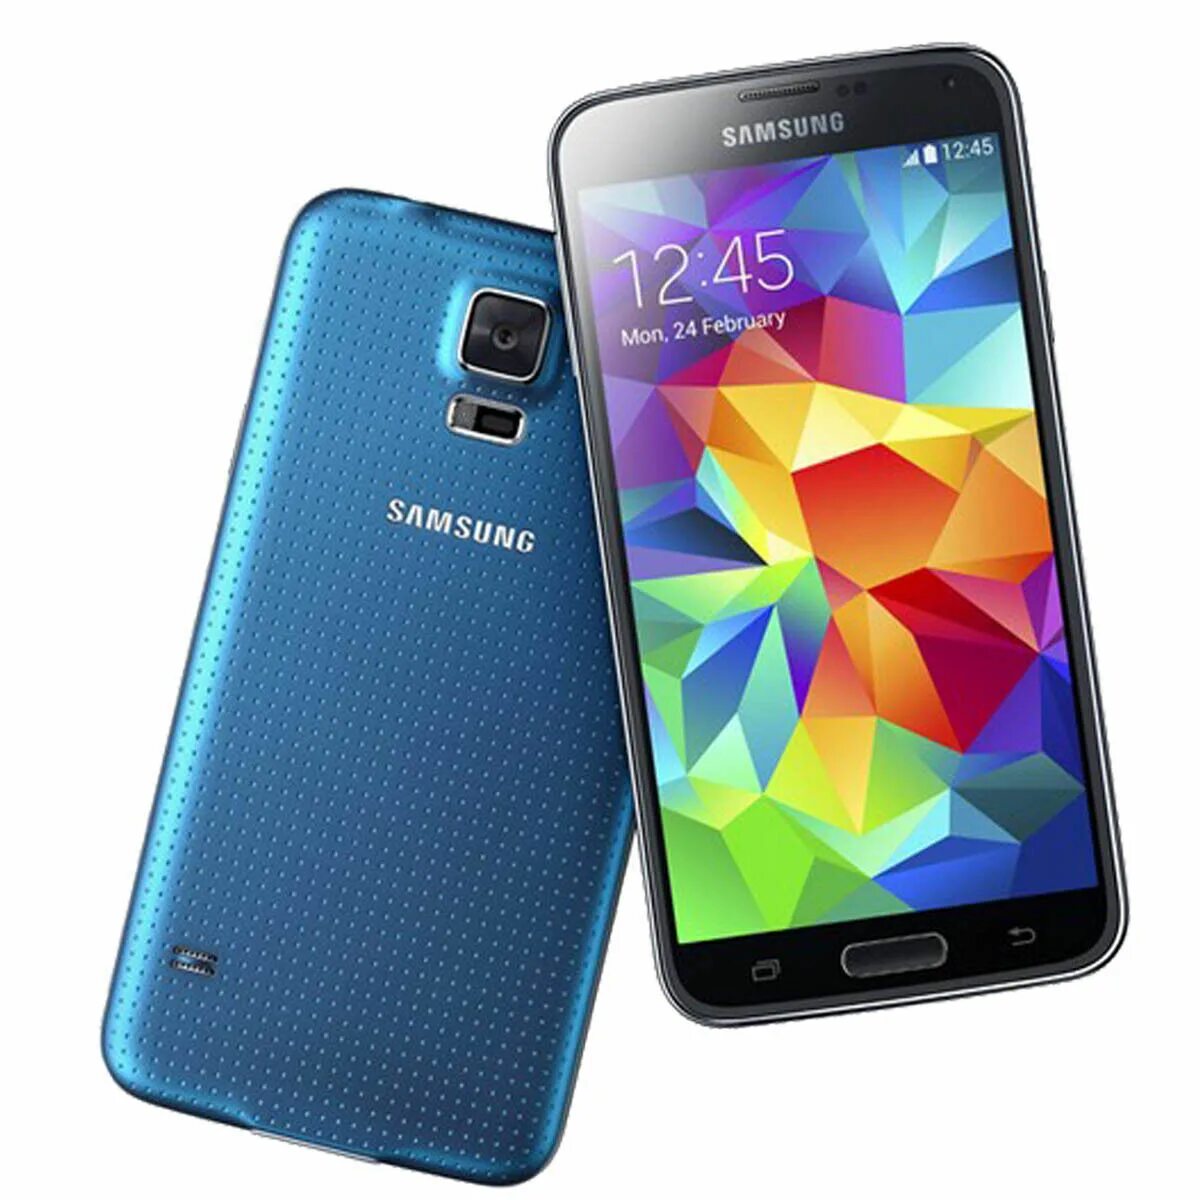 Samsung s 5g. Samsung Galaxy s5 SM-g900. Samsung Galaxy s5 SM-g900f 16gb. Samsung s5 LTE. Samsung g900fd Galaxy s5 Duos.